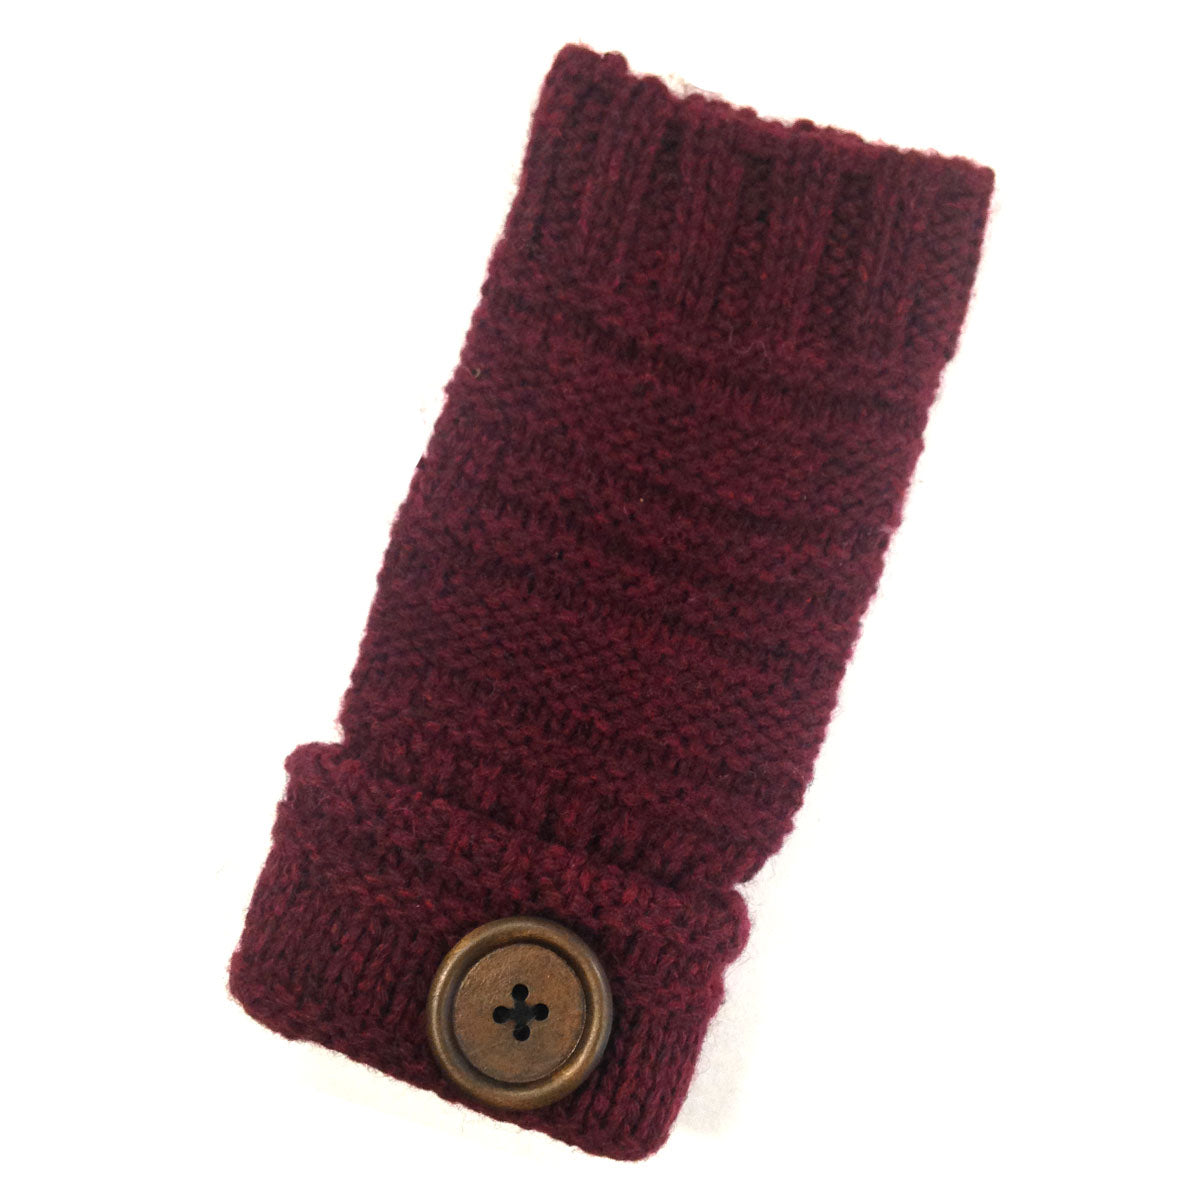 Wrapables Fingerless Gloves with Button Accent